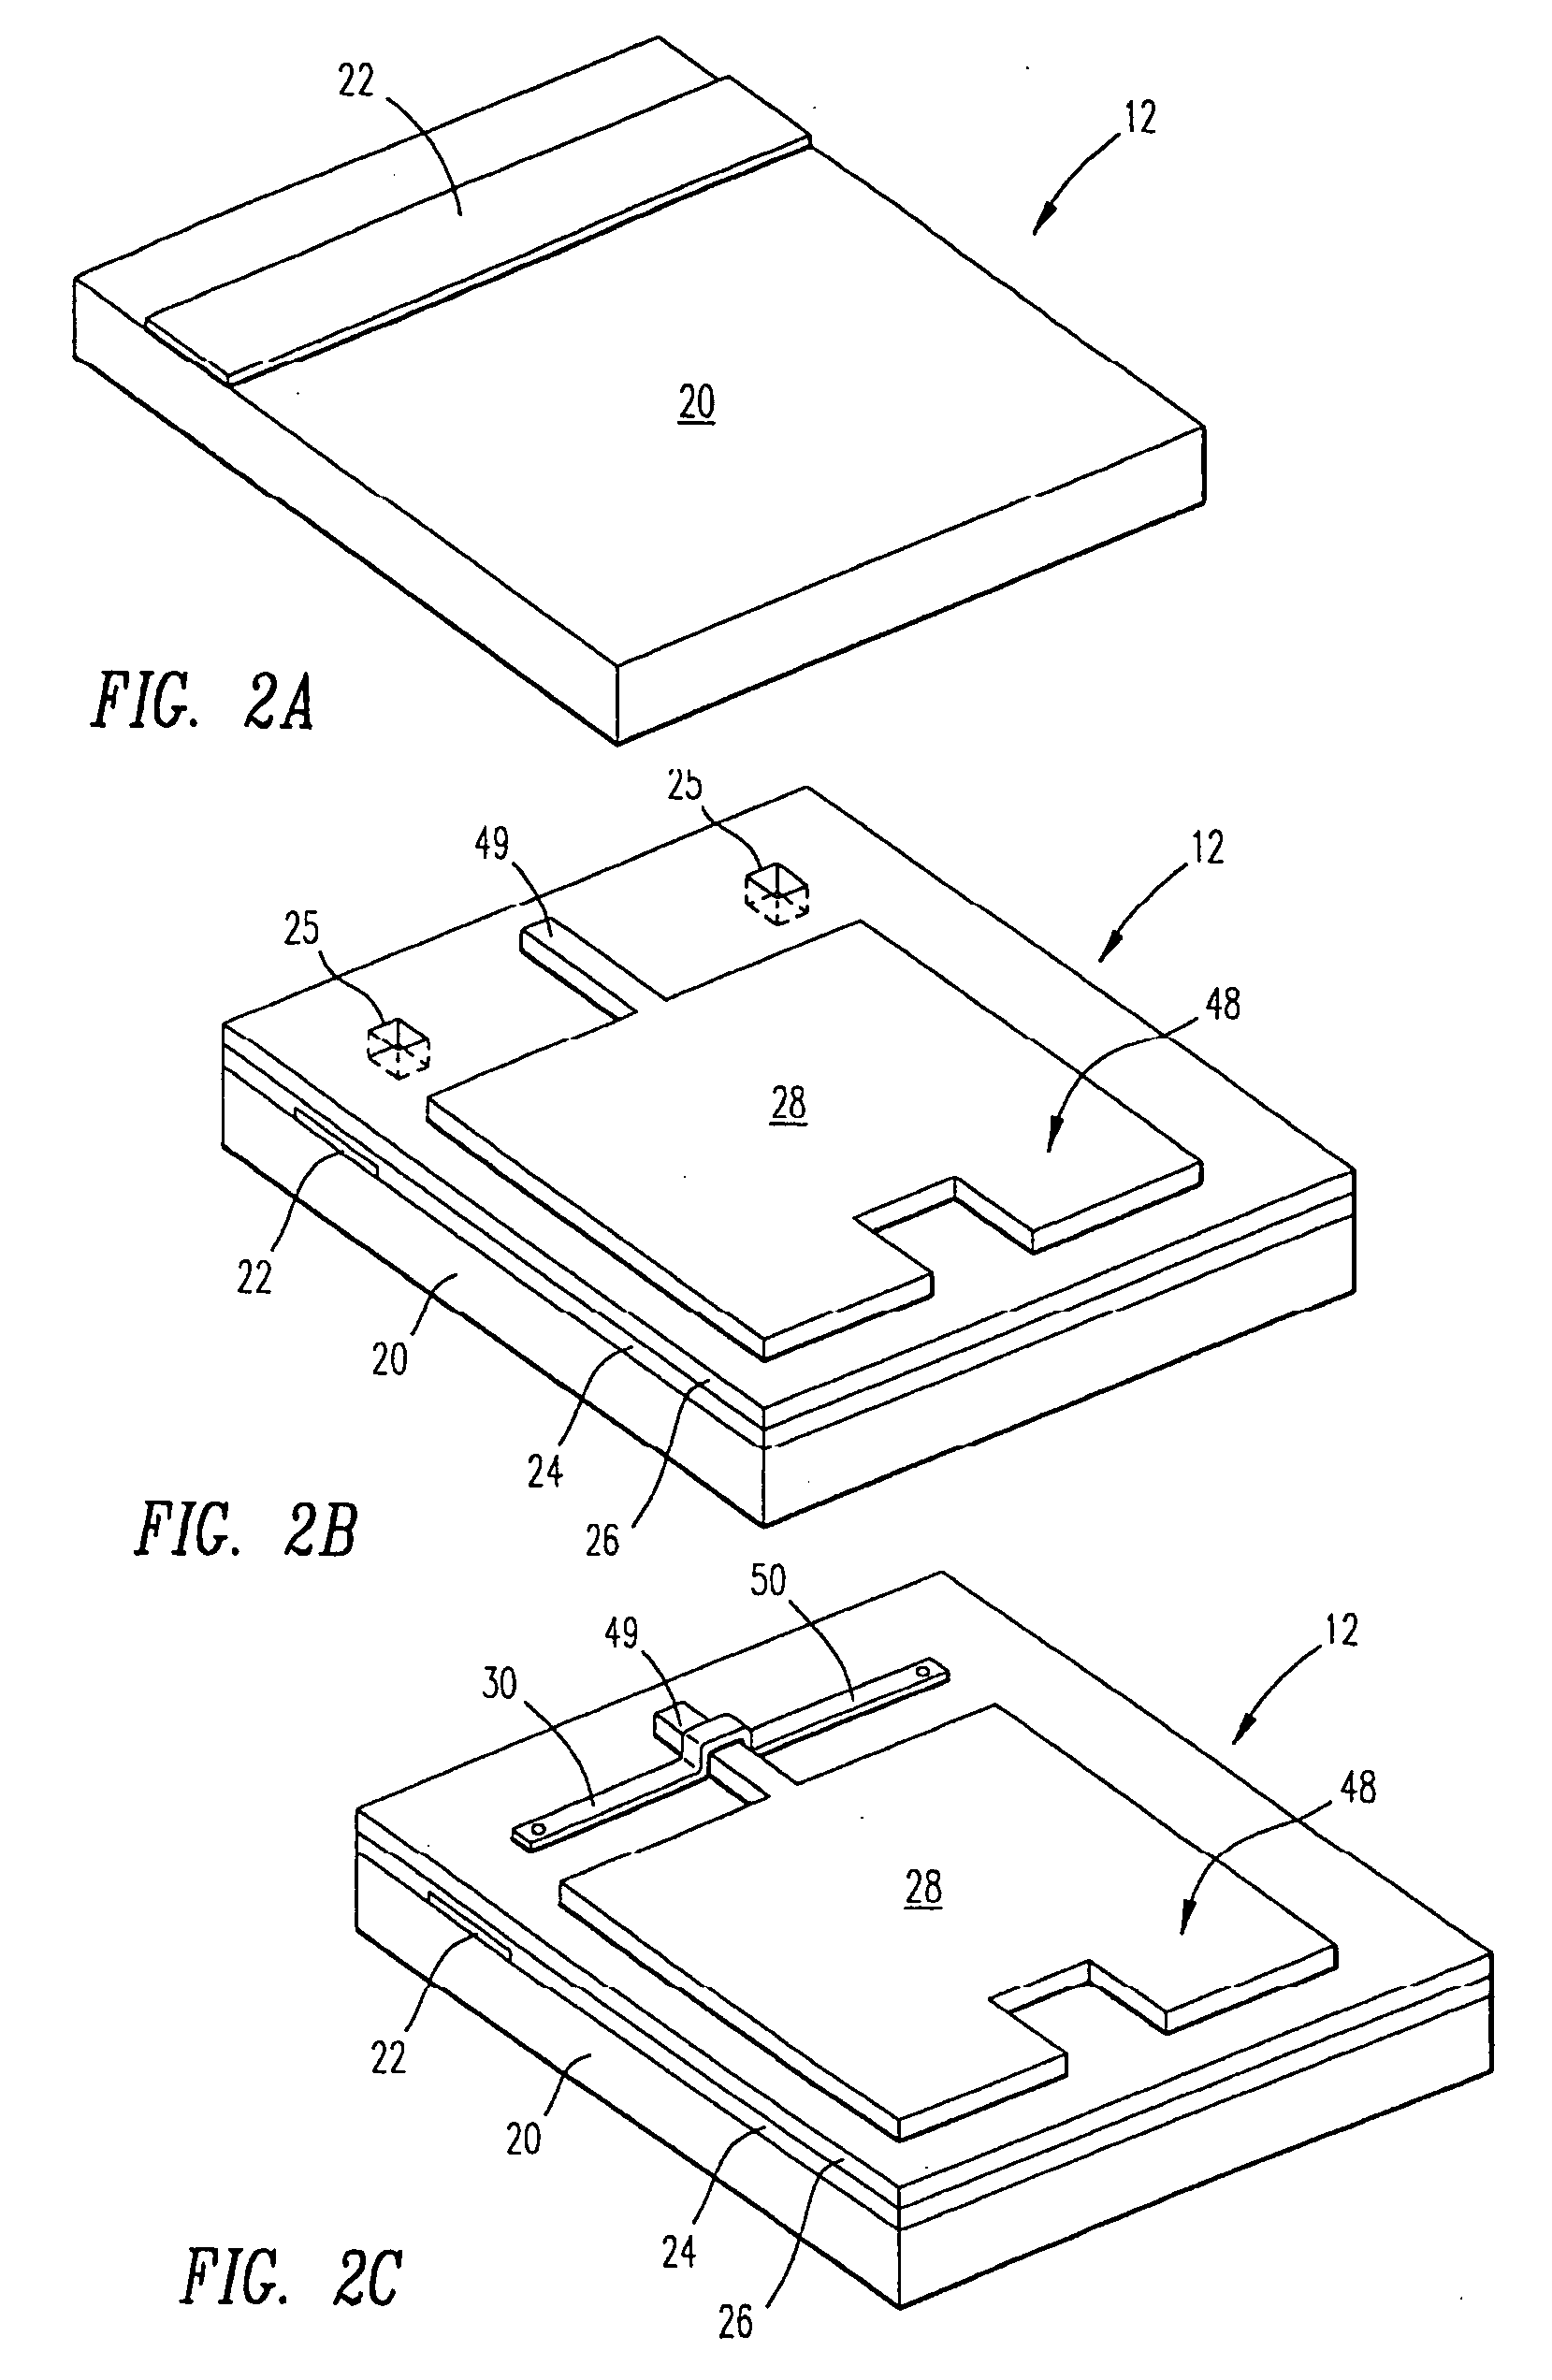 Double substrate reflective spatial light modulator with self-limiting micro-mechanical elements